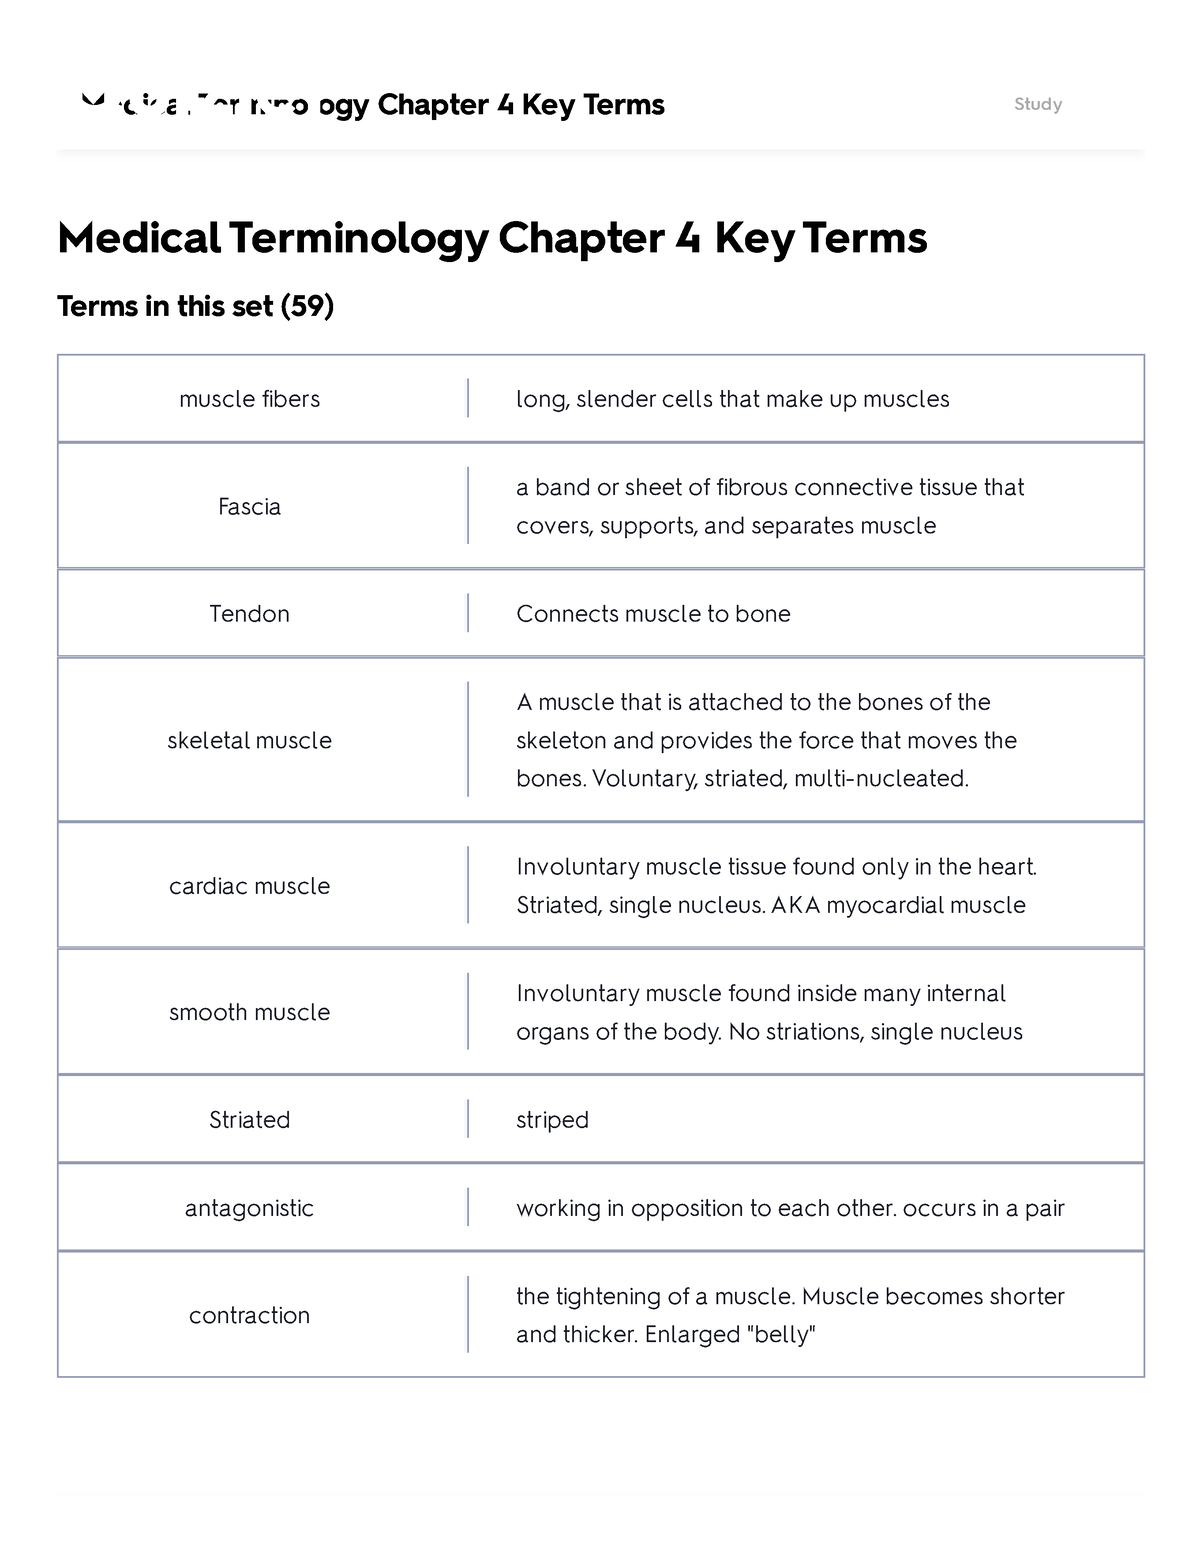 Medical Terminology Chapter 4 Key Terms Flashcards Quizlet Medical